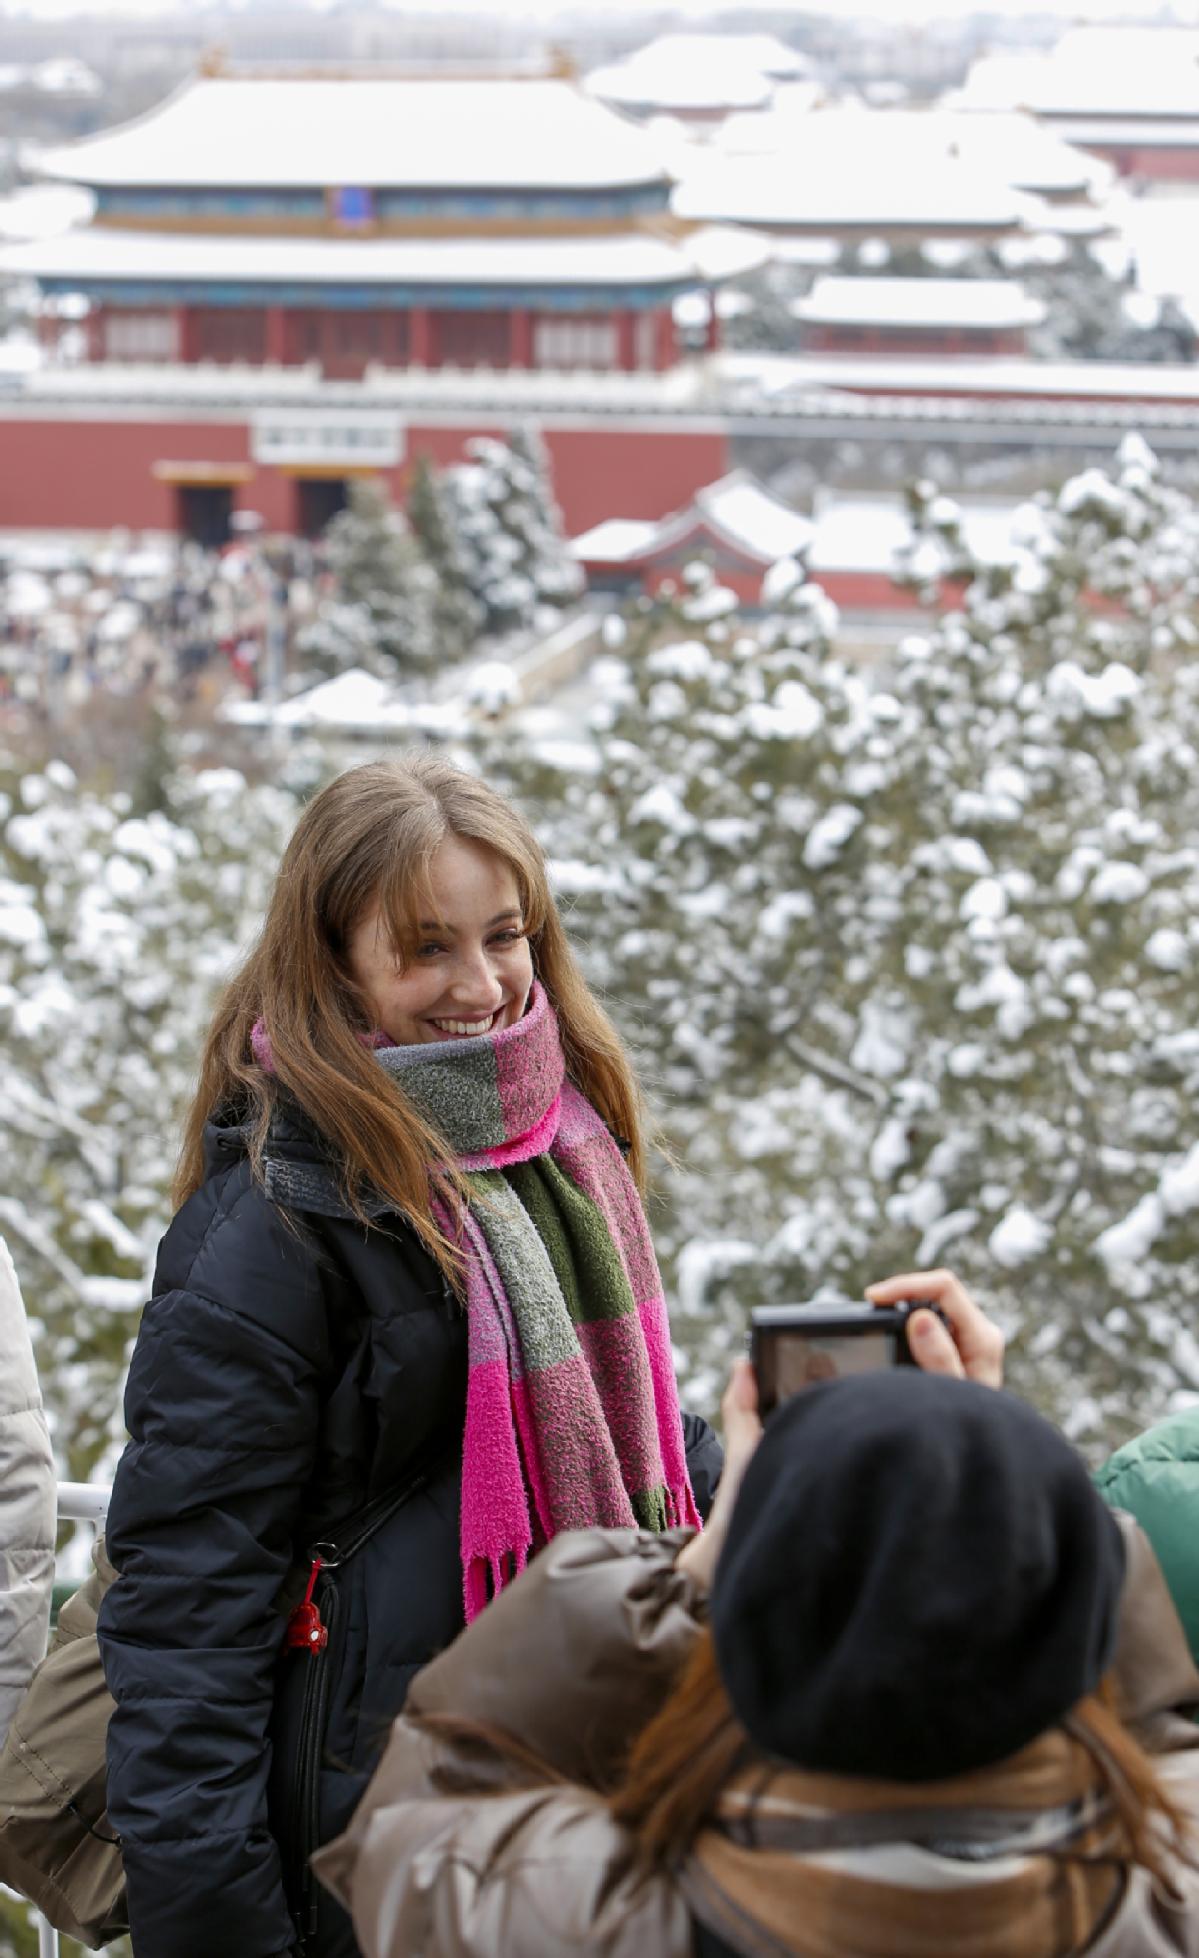 Foreigners' tours in China to be more convenient: minister